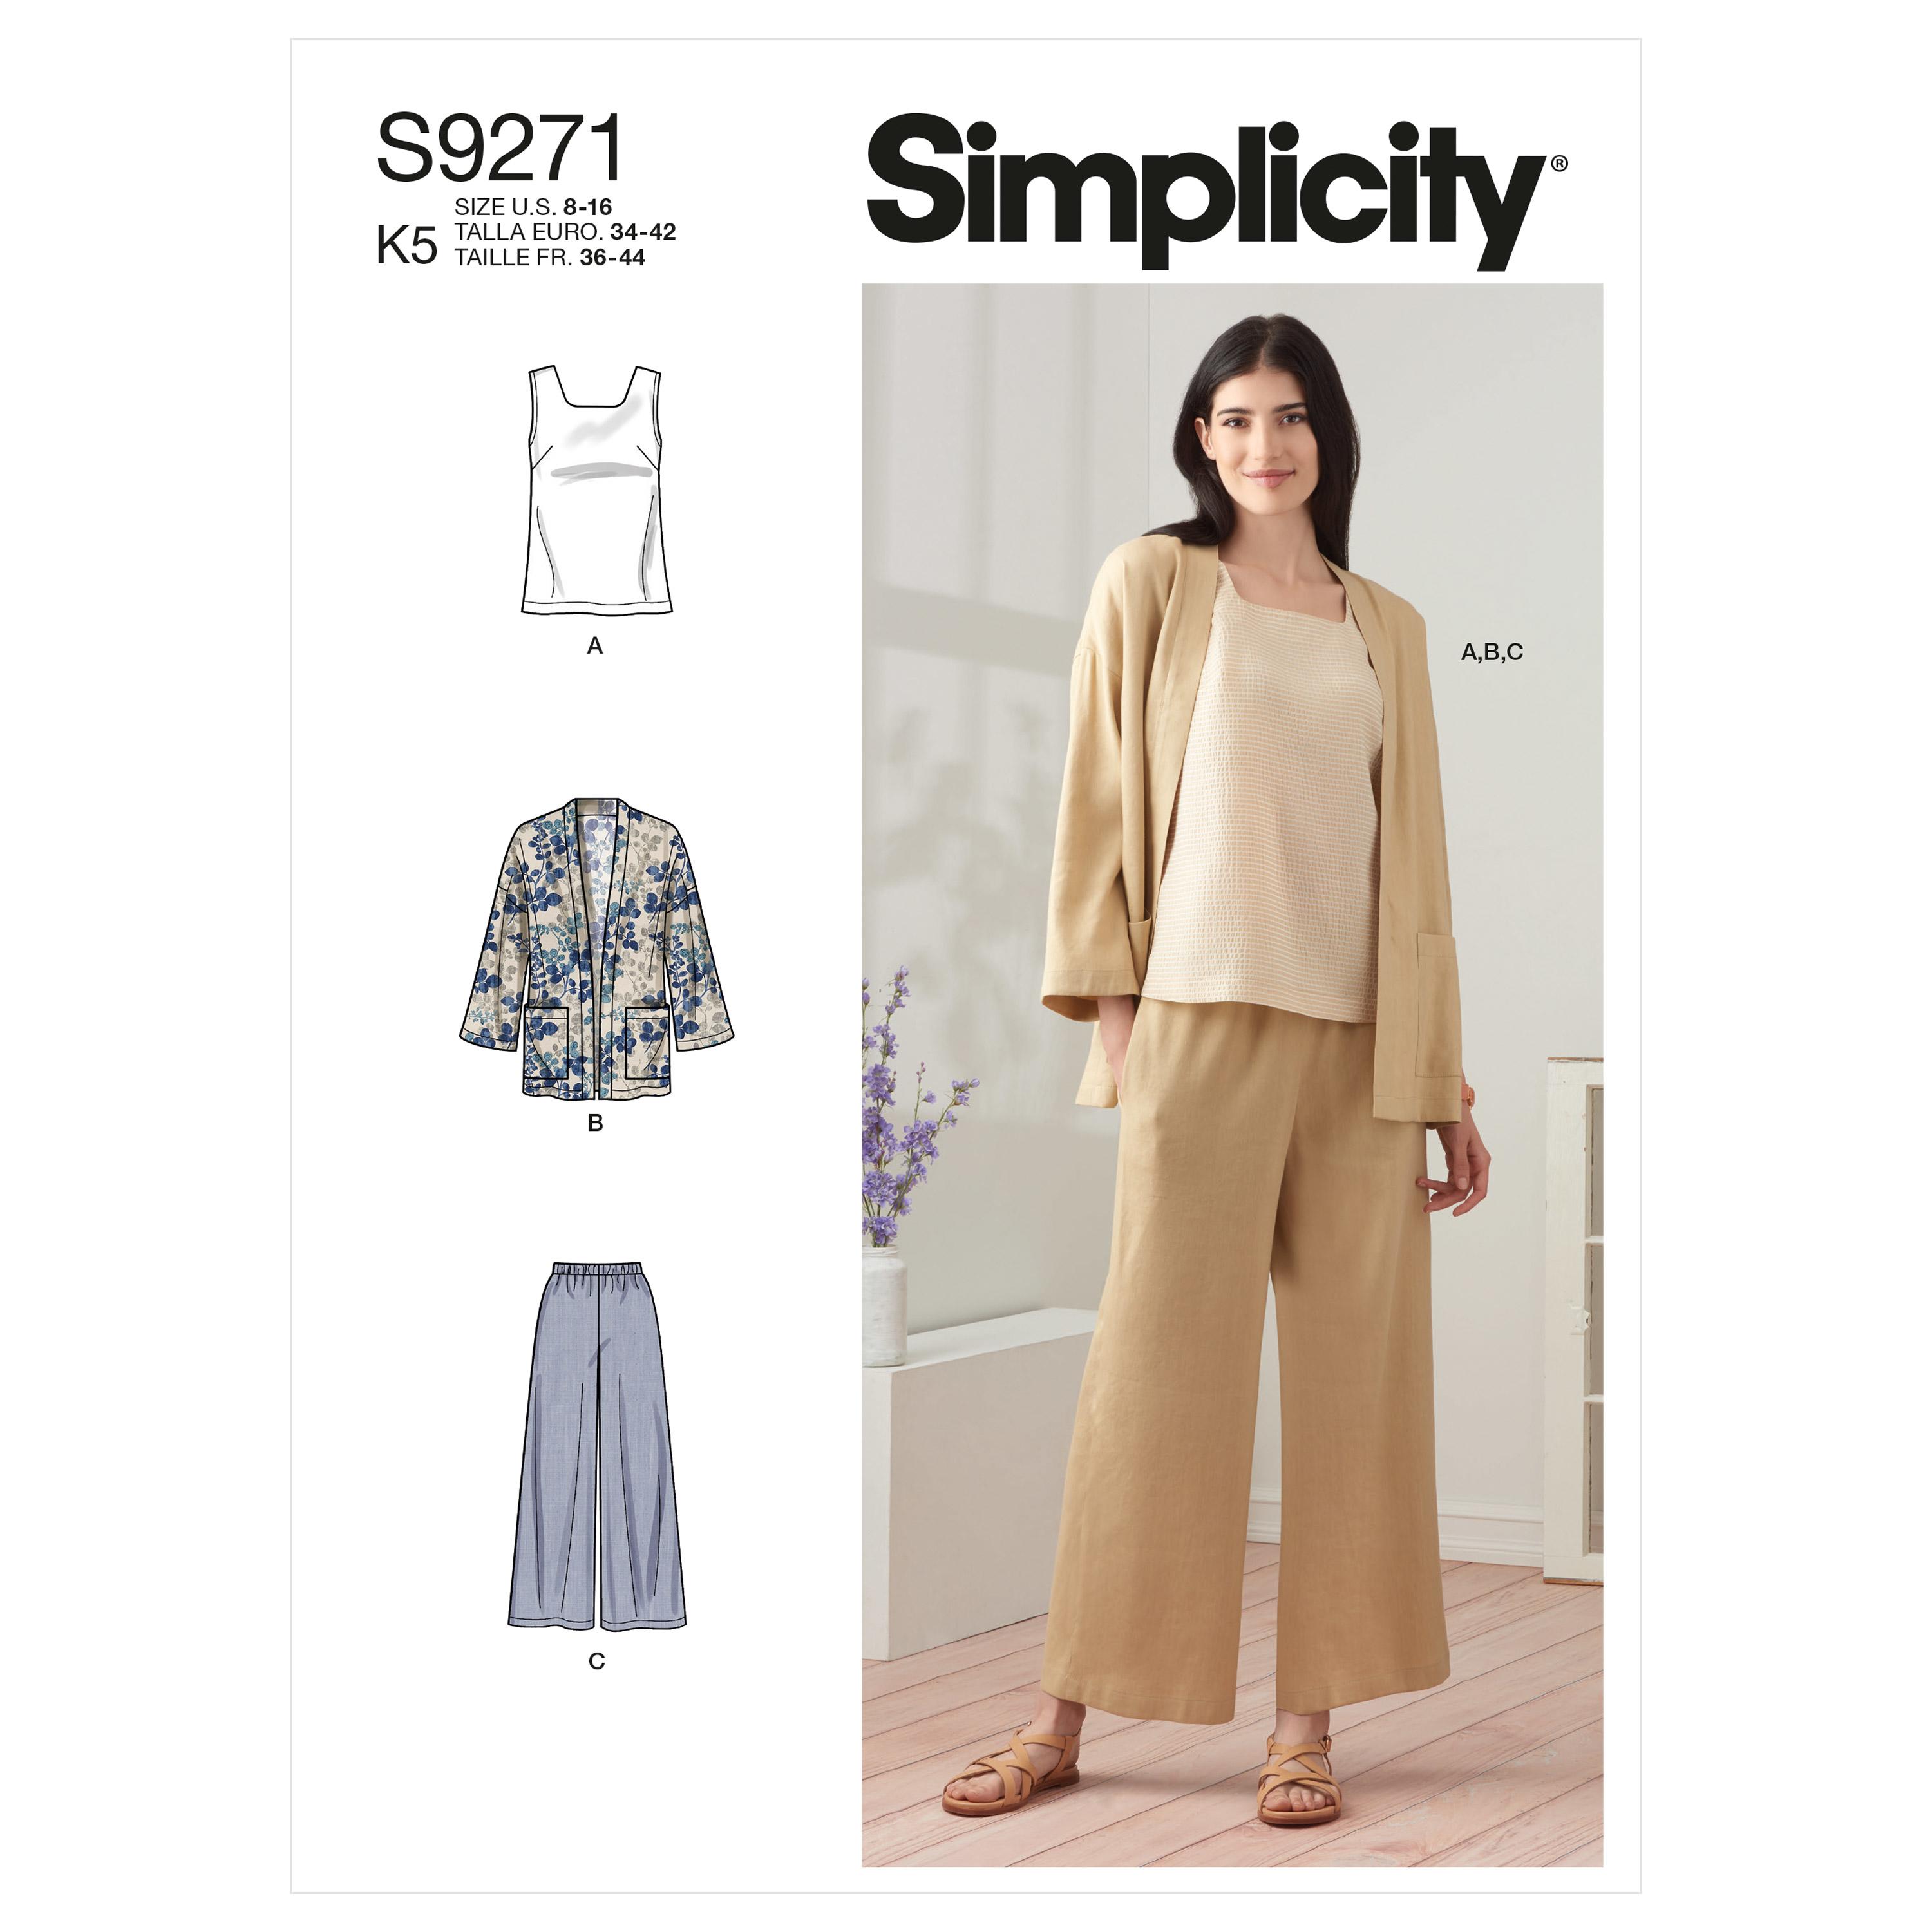 Simplicity Sewing Pattern S9271 Misses' Jacket, Top & Pants